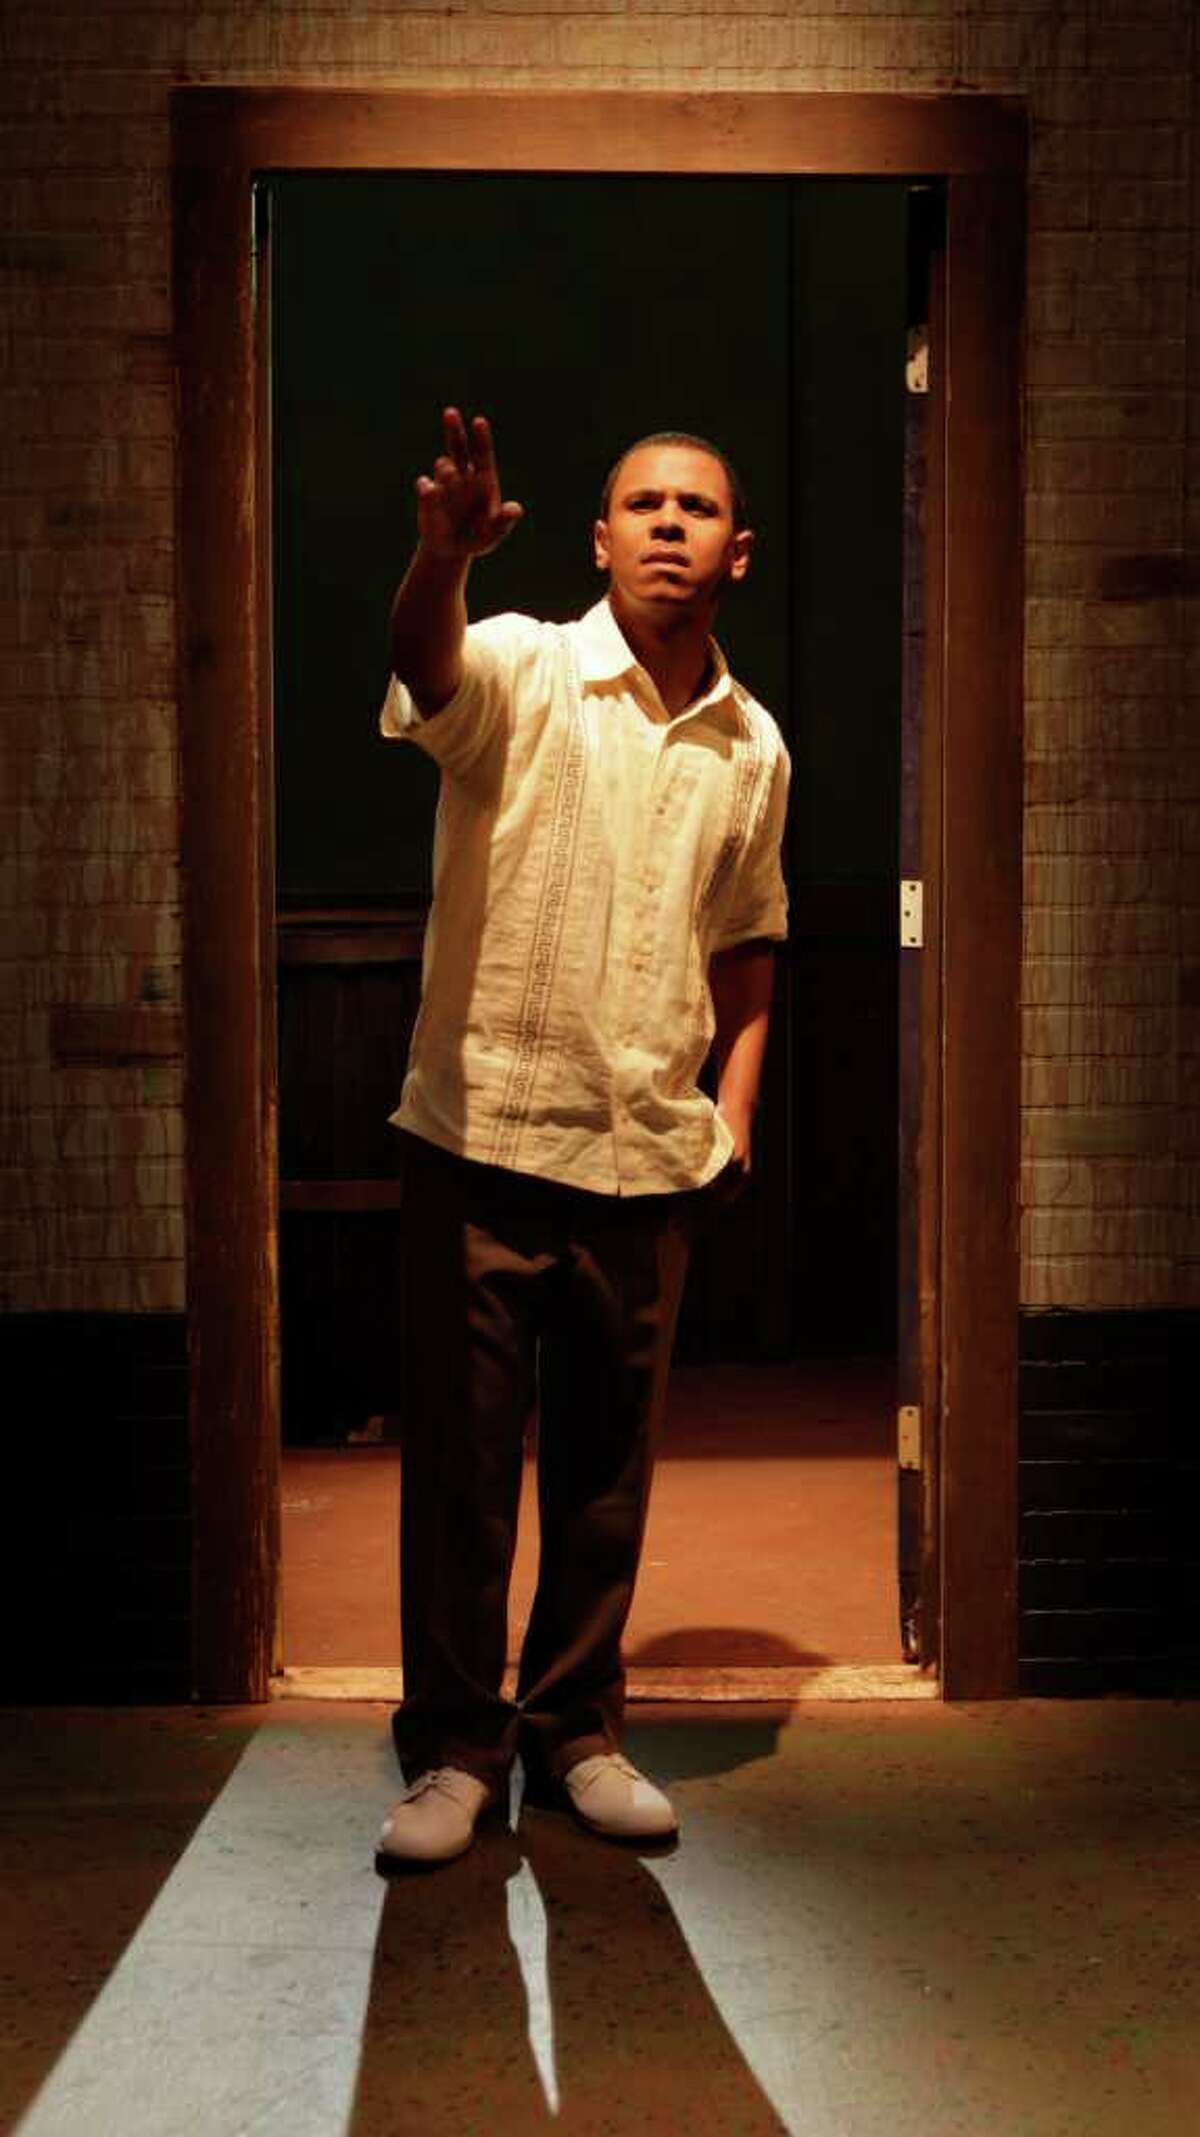 Joseph Palmore has the title role in The Ballad of Emmett Till, playing at the Ensemble Theatre. Ifa Bayeza's play is based on the notorious 1955 "hate crimes" case of a Chicago youth murdered whle visiting relatives in rural Mississippi.